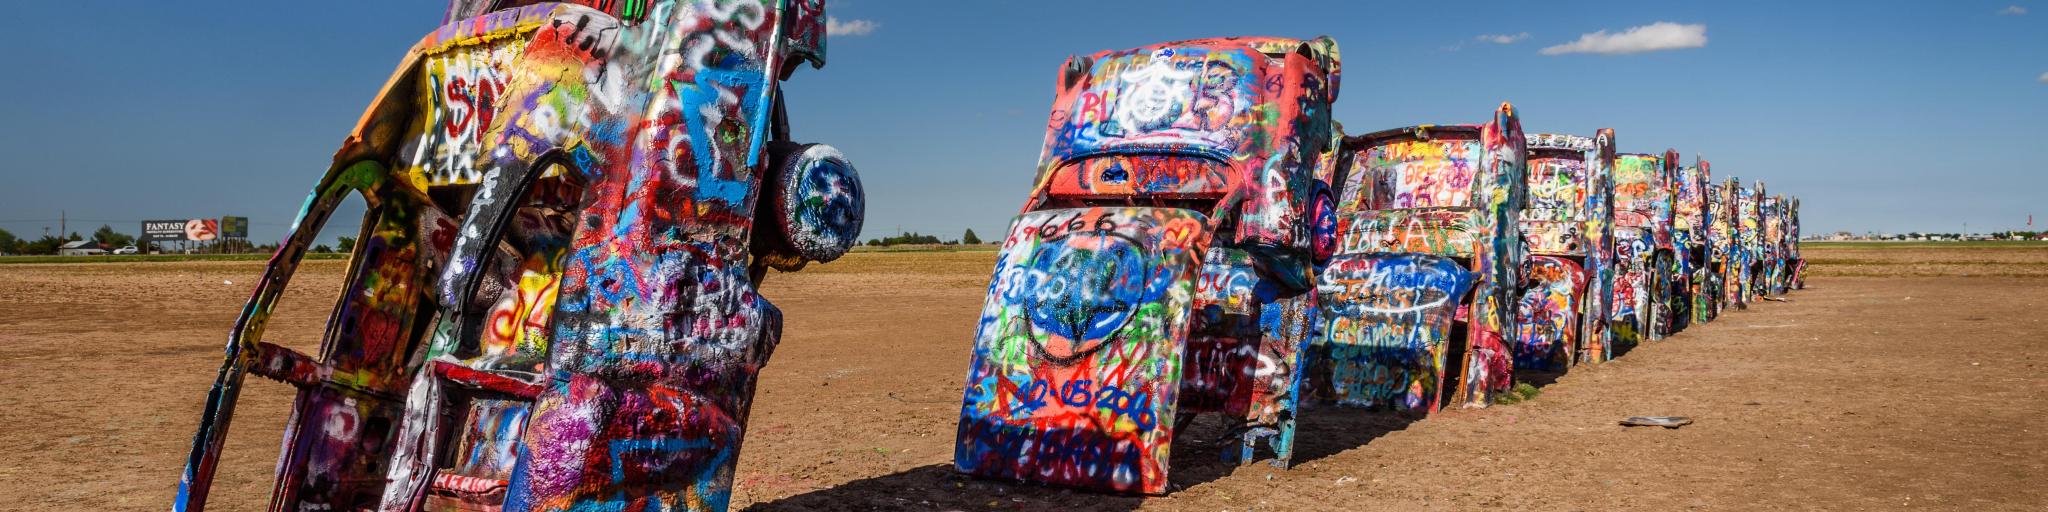 Cadillac Ranch in Amarillo, a popular landmark on historic Route 66, on a sunny day. There are several Cadillac cars in the sand, upside down.